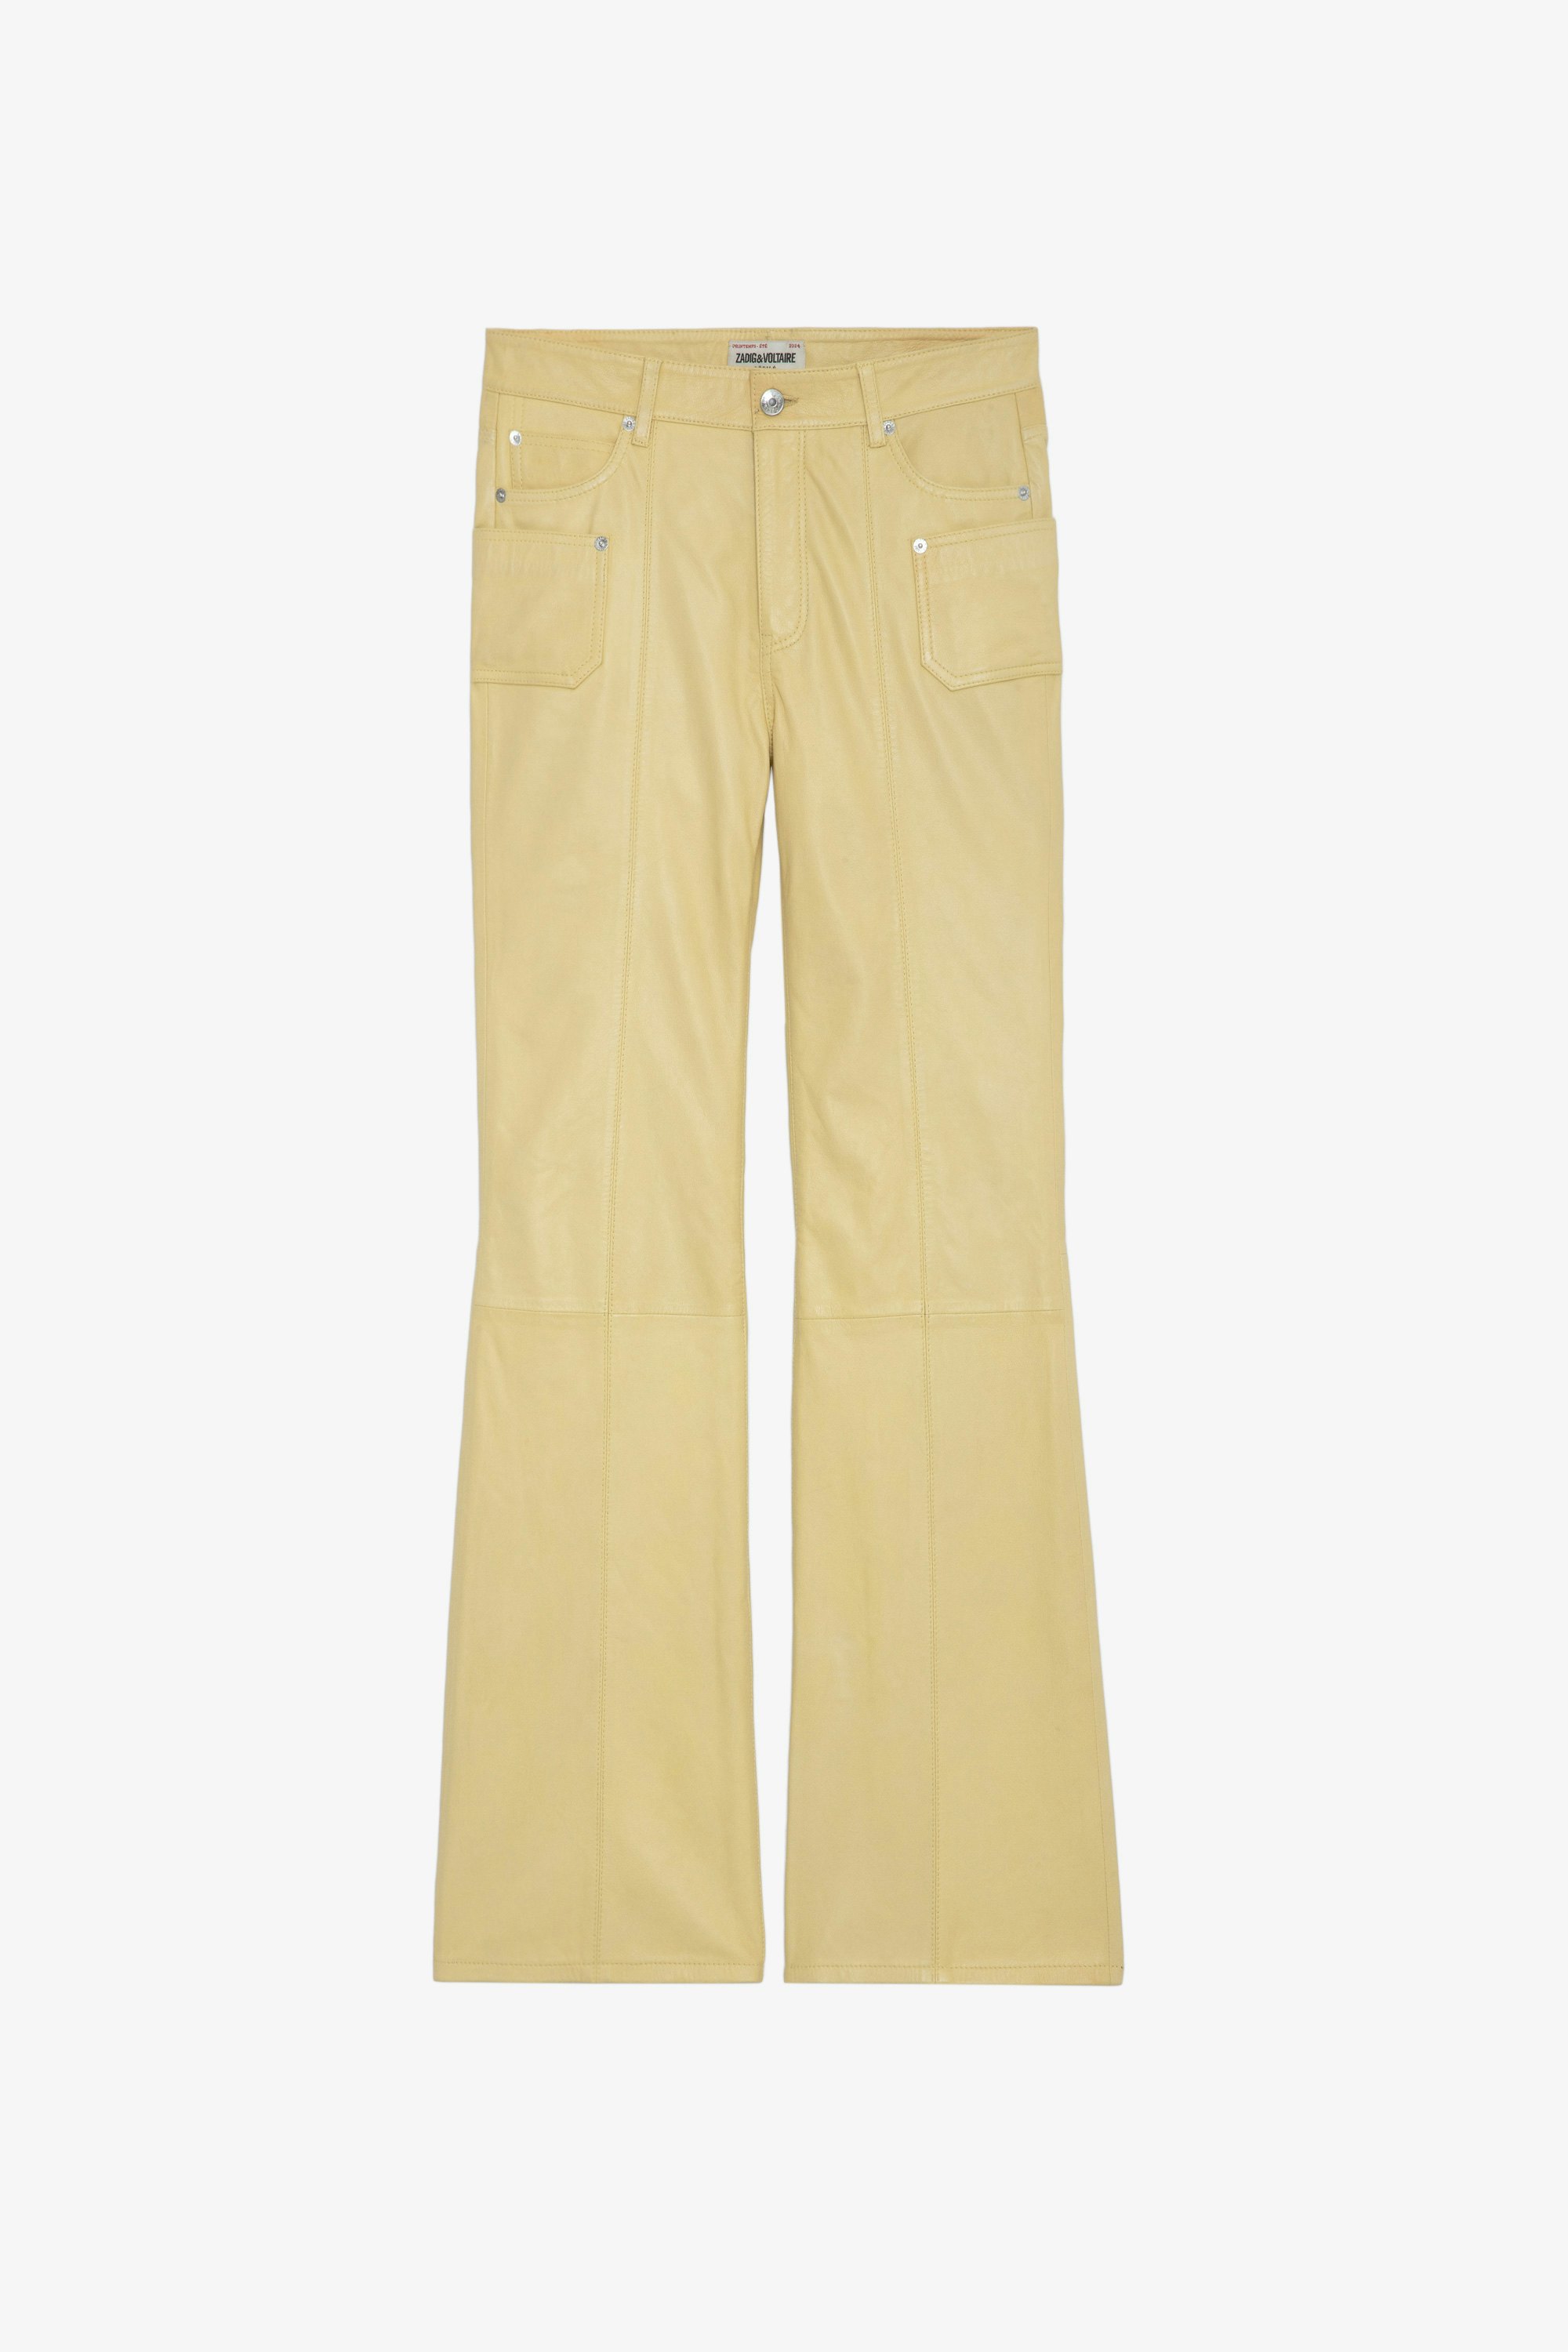 Elvir Leather Pants - Light yellow smooth leather trousers with flared hem and pockets.